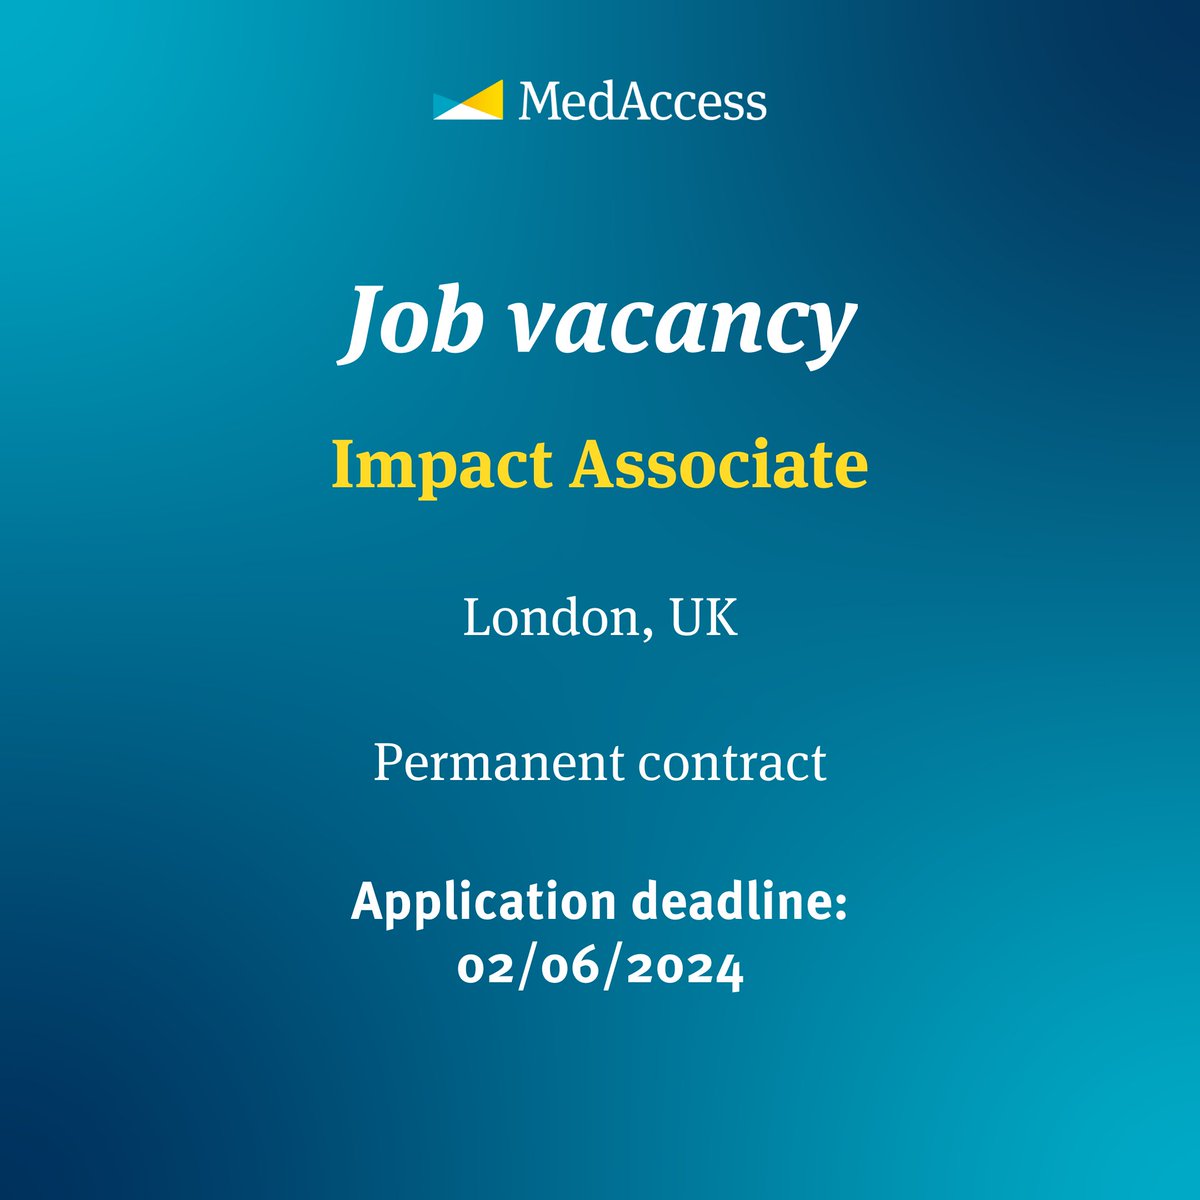 🆕 We are hiring! We are looking for an Impact Associate to join our team. Reporting to the Head of Impact, you will support our impact evaluations and assessments, monitor executed deals and review our Impact Framework. Apply by 2 June ➡️ medaccess.org/careers/